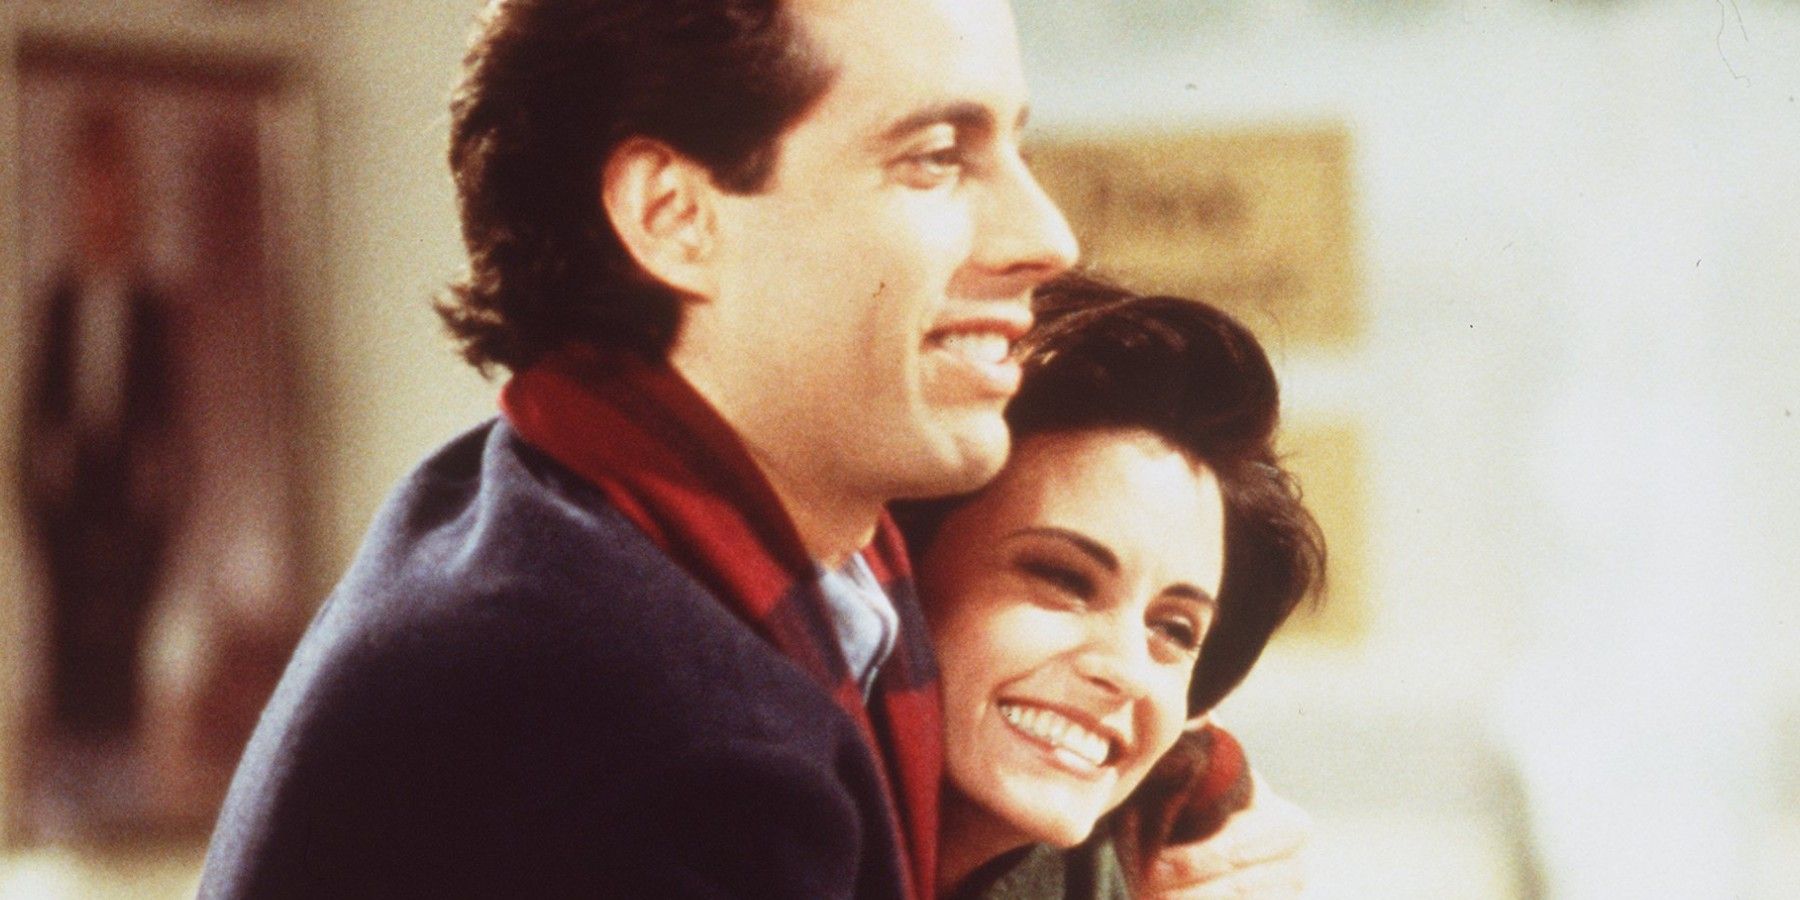 Seinfeld: 10 Girlfriends Of Jerry And George That We’d All Love To Date